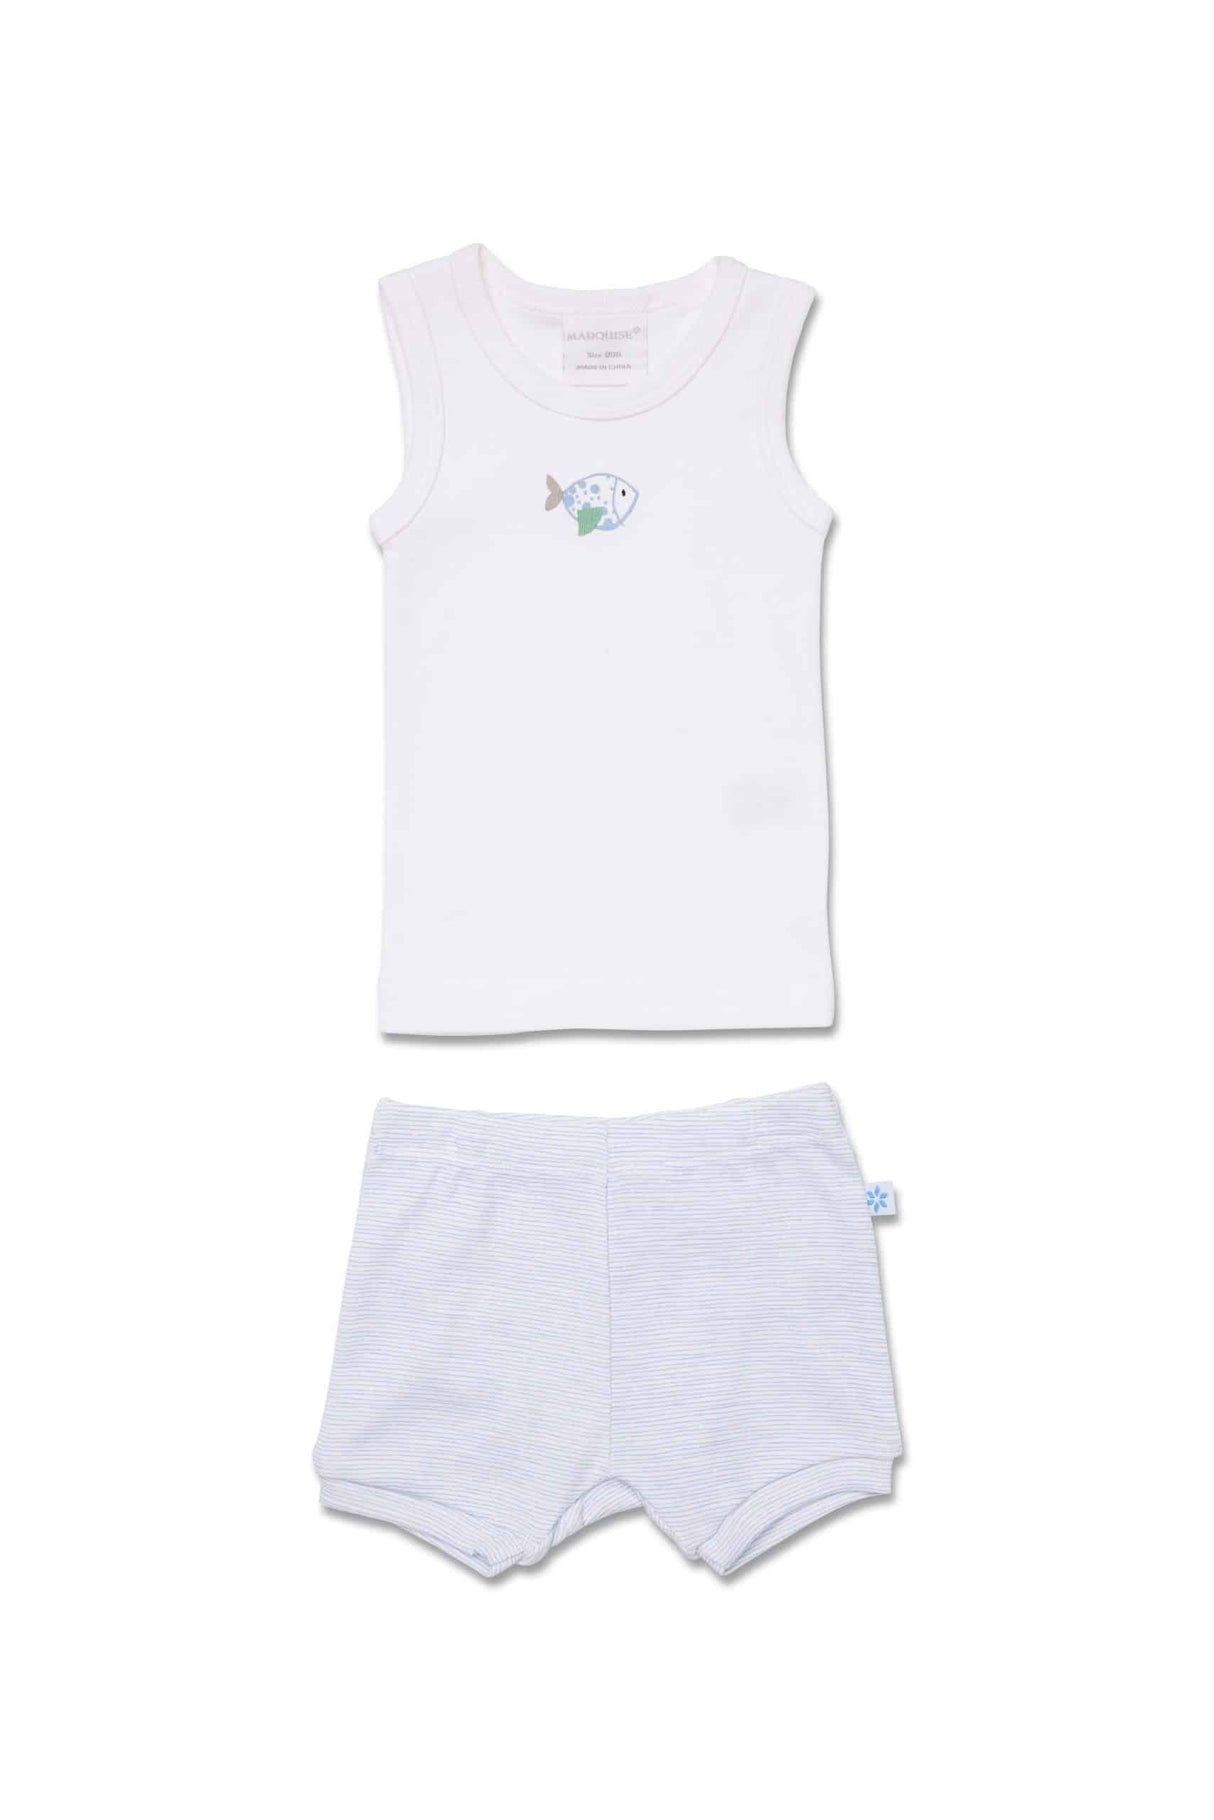 Marquise Fish Singlet and Blue Short Set